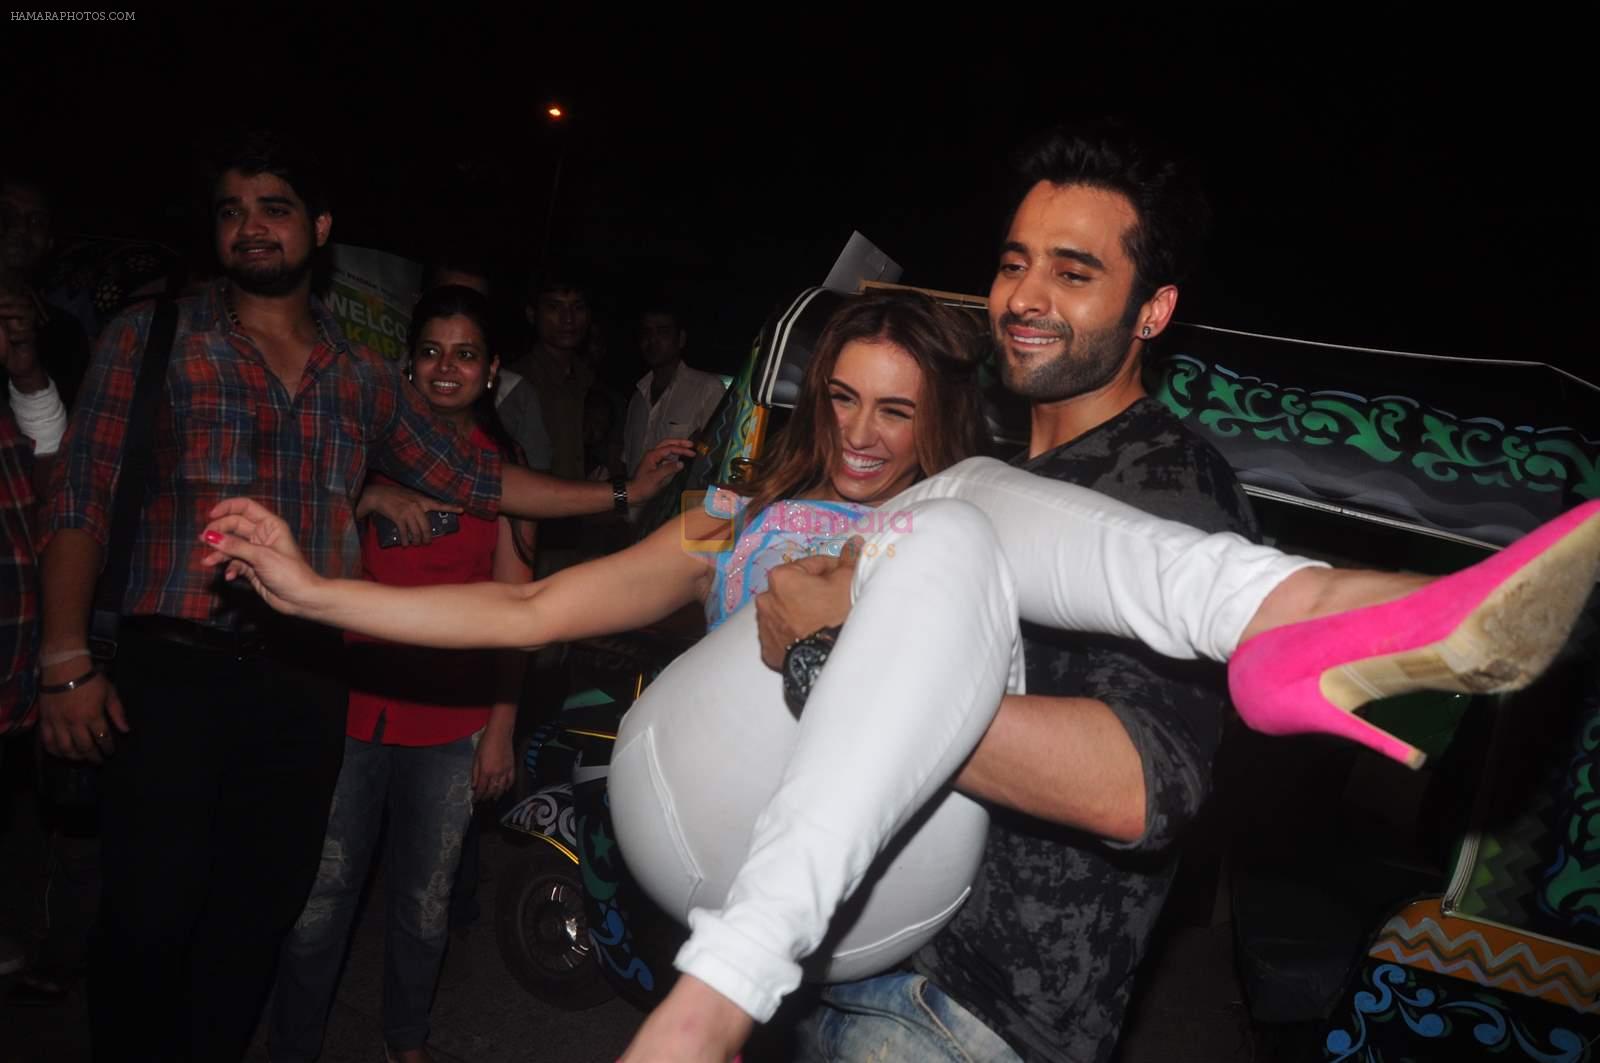 Lauren gottlieb, Jackky Bhagnani at Welcome to karachi promotions in Juhu, Mumbai on 22nd April 2015